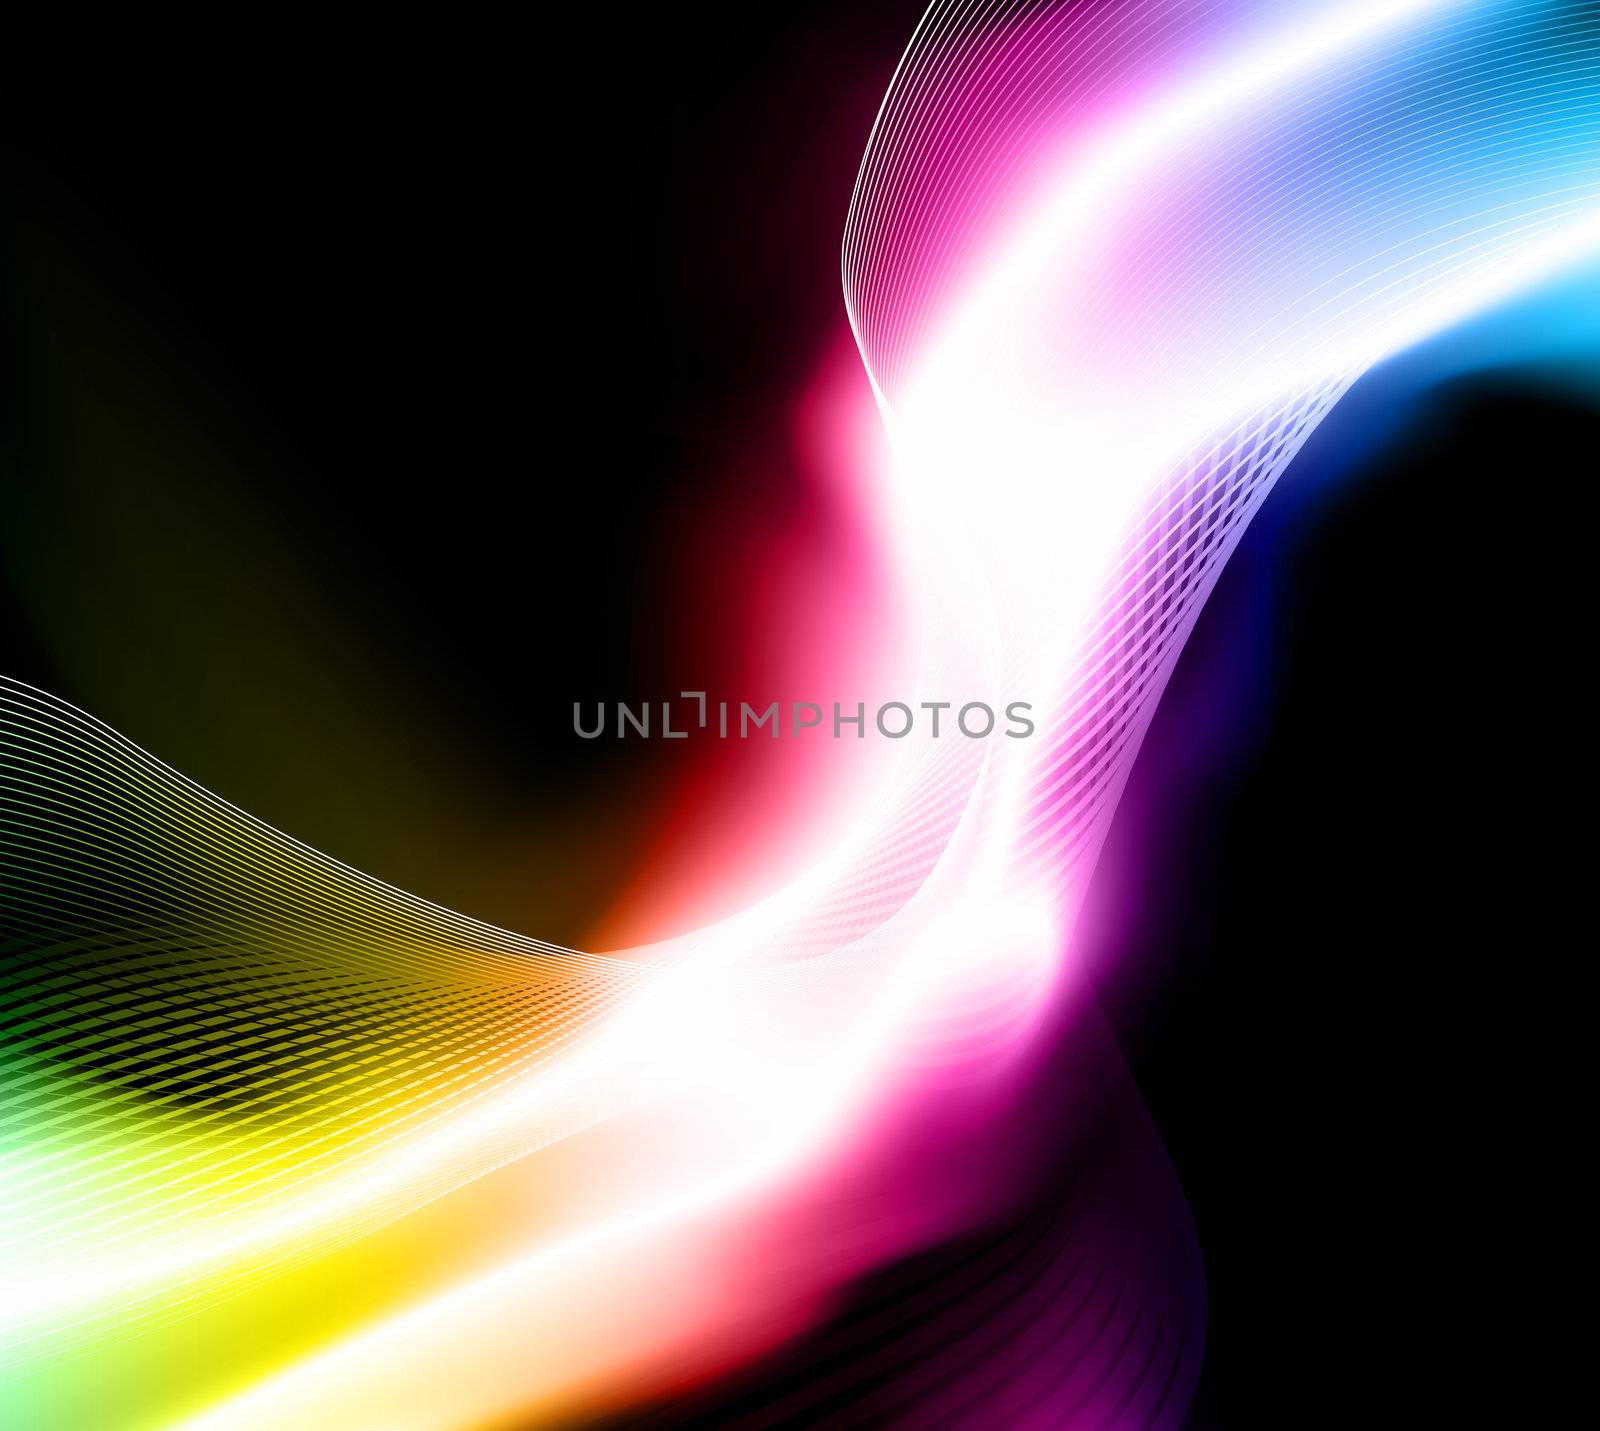 Vector illustration of a lined art abstraction background.